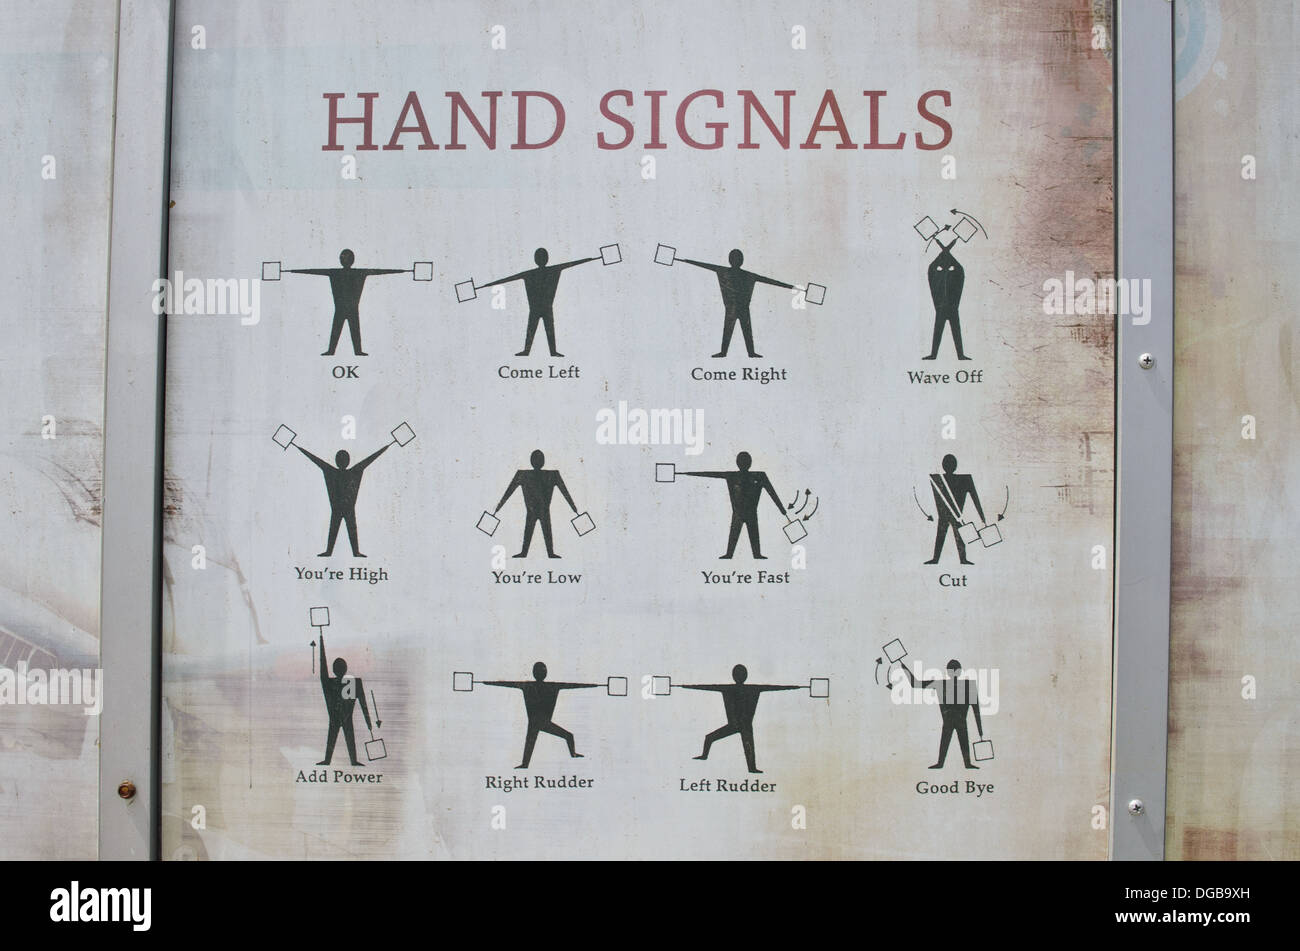 Traffic Hand Signals In The Philippines